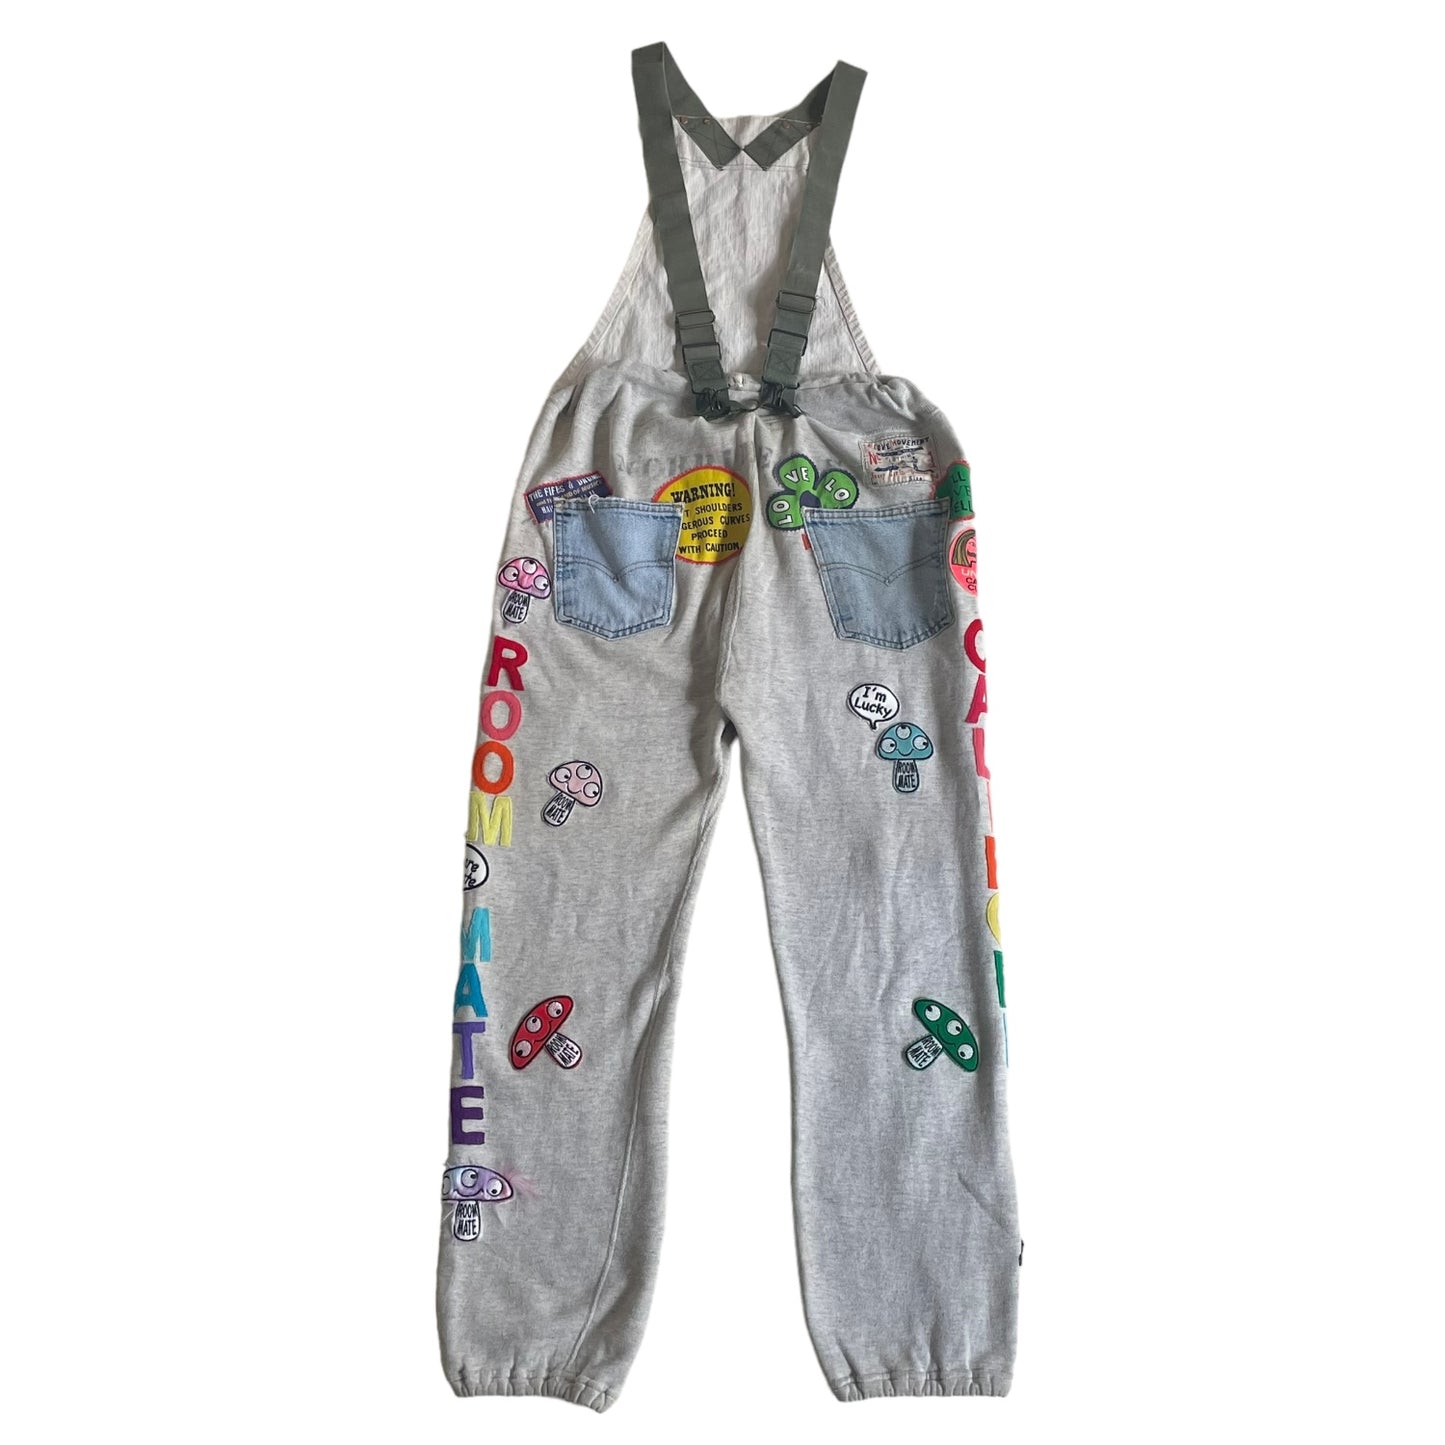 ALM original recycled vintage sweatpants and apron overall